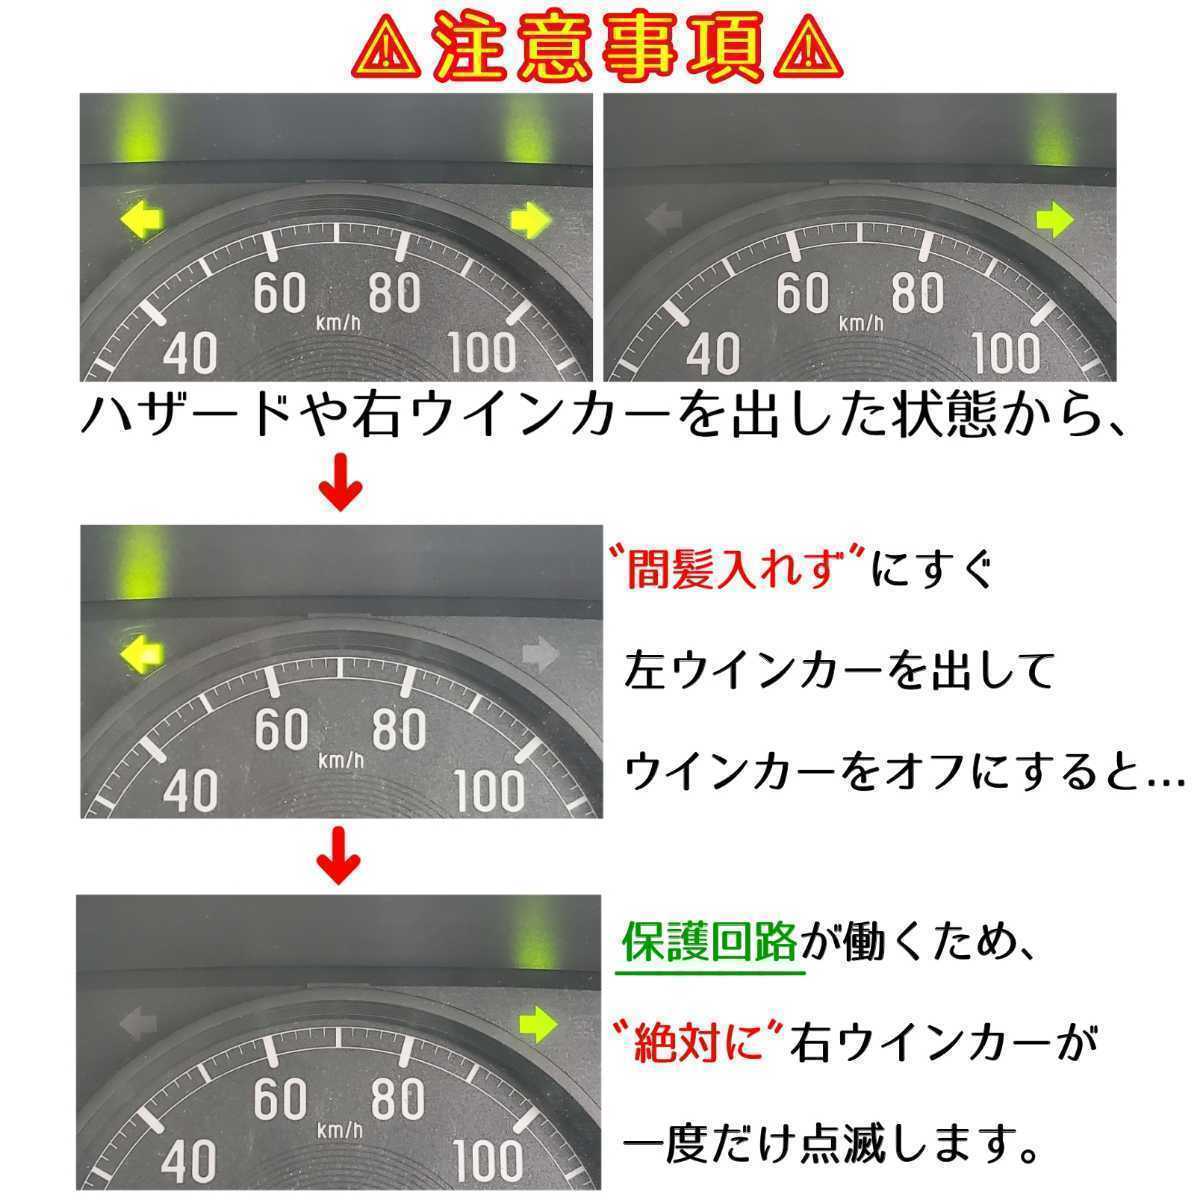 8 pin turn signal relay winker relay LED high fla measures prevention relay etc. interval kachikachi sound slowly slow less -step adjustment HE21S Lapin 